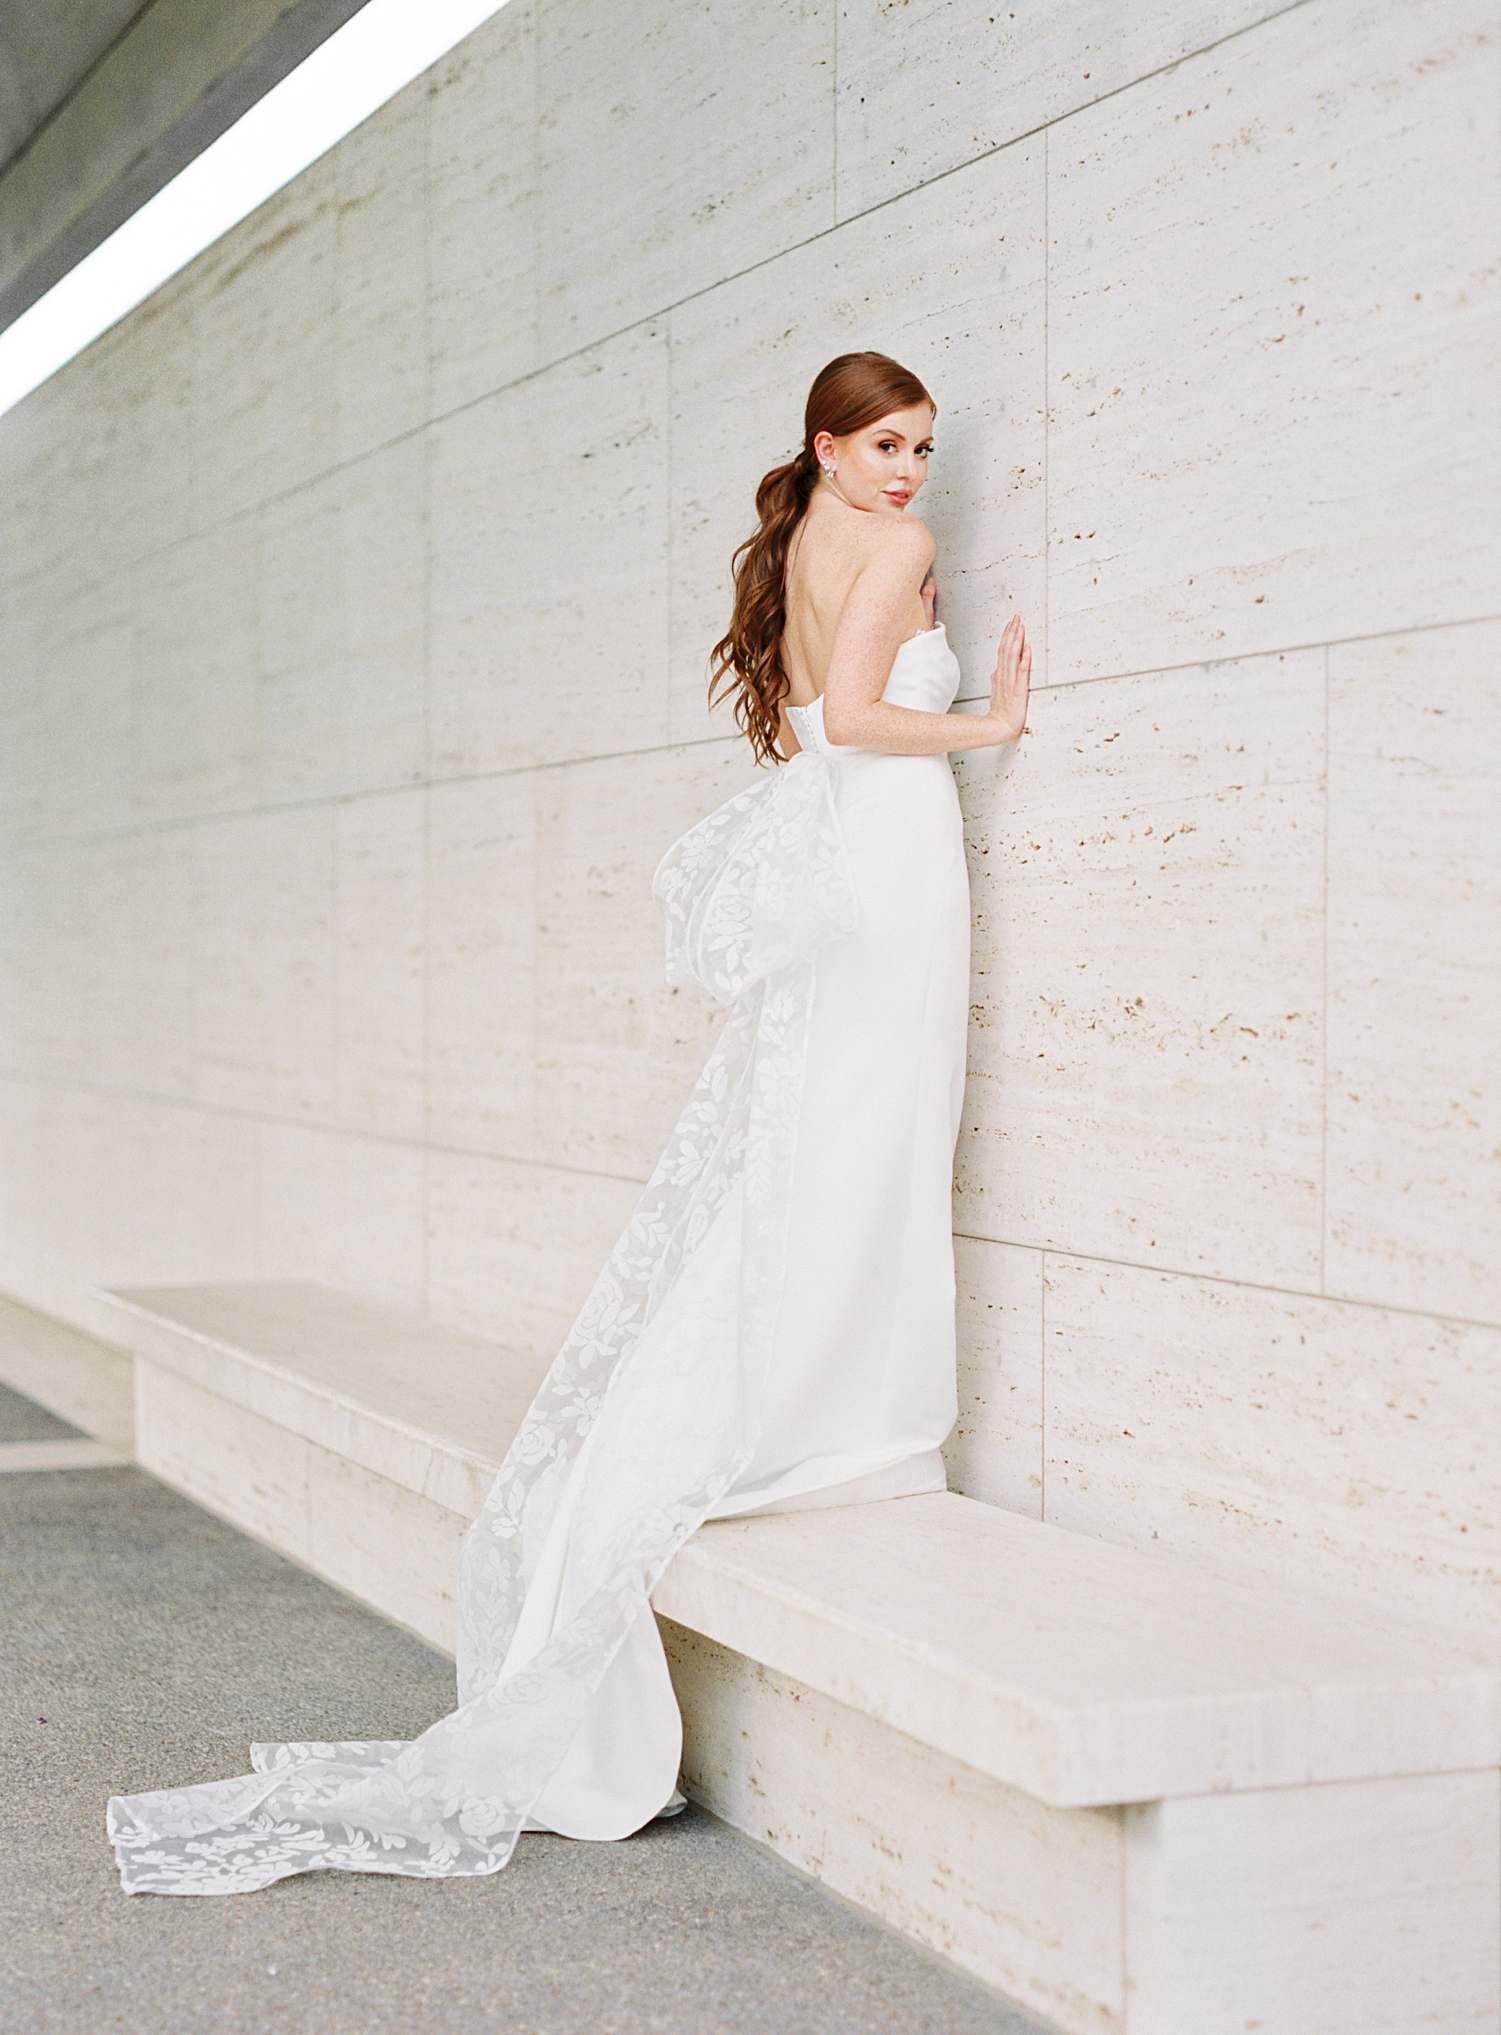 red headed bride standing against concrete wall in white Sareh Nouri bridal gown with lace bow on back